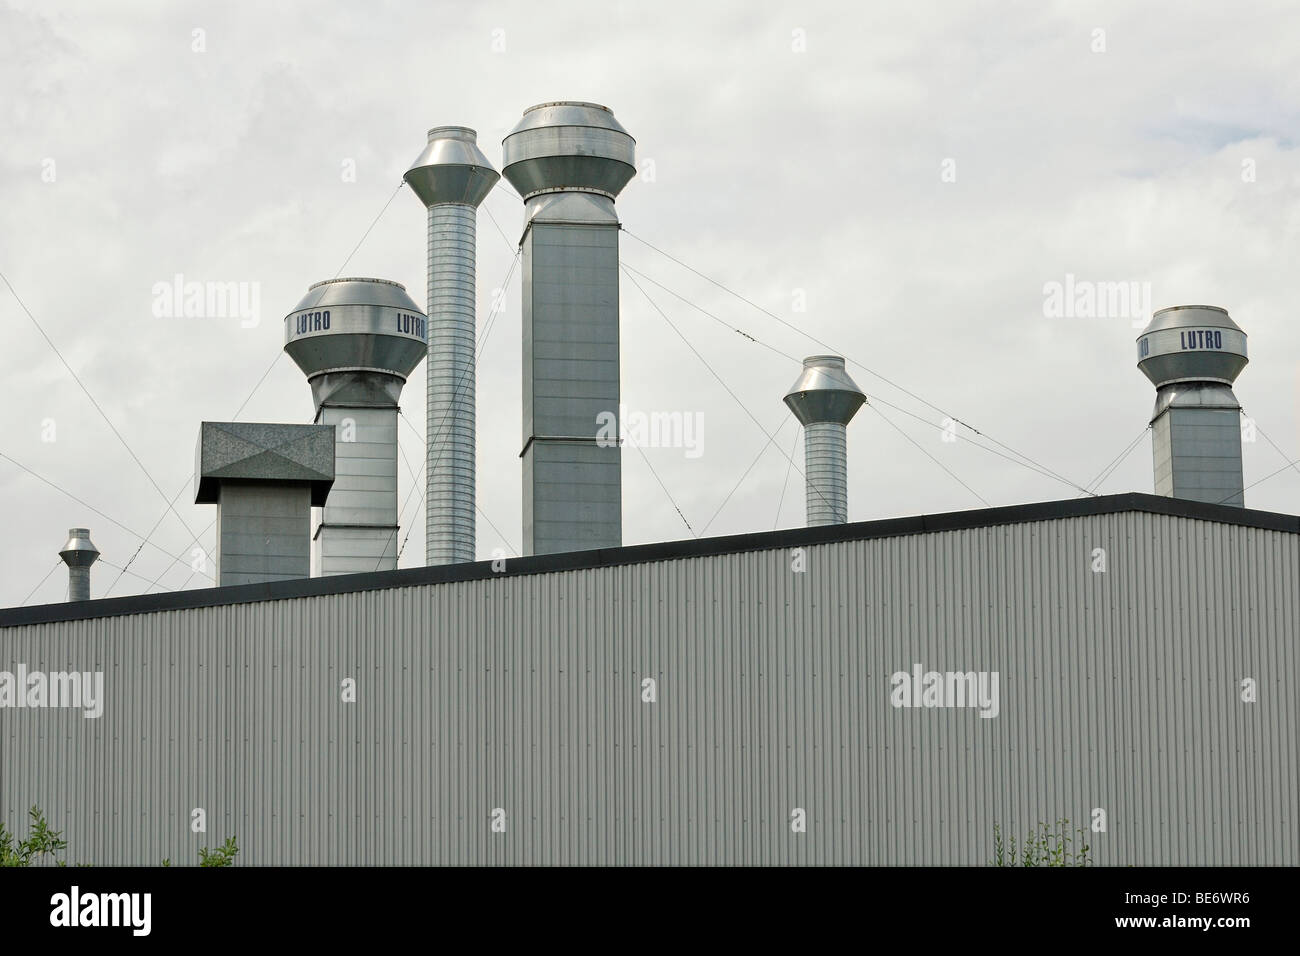 Industrial plant with filter flues and chimneys, partial view, Zaberfeld, Baden-Wuerttemberg, Germany, Europe Stock Photo